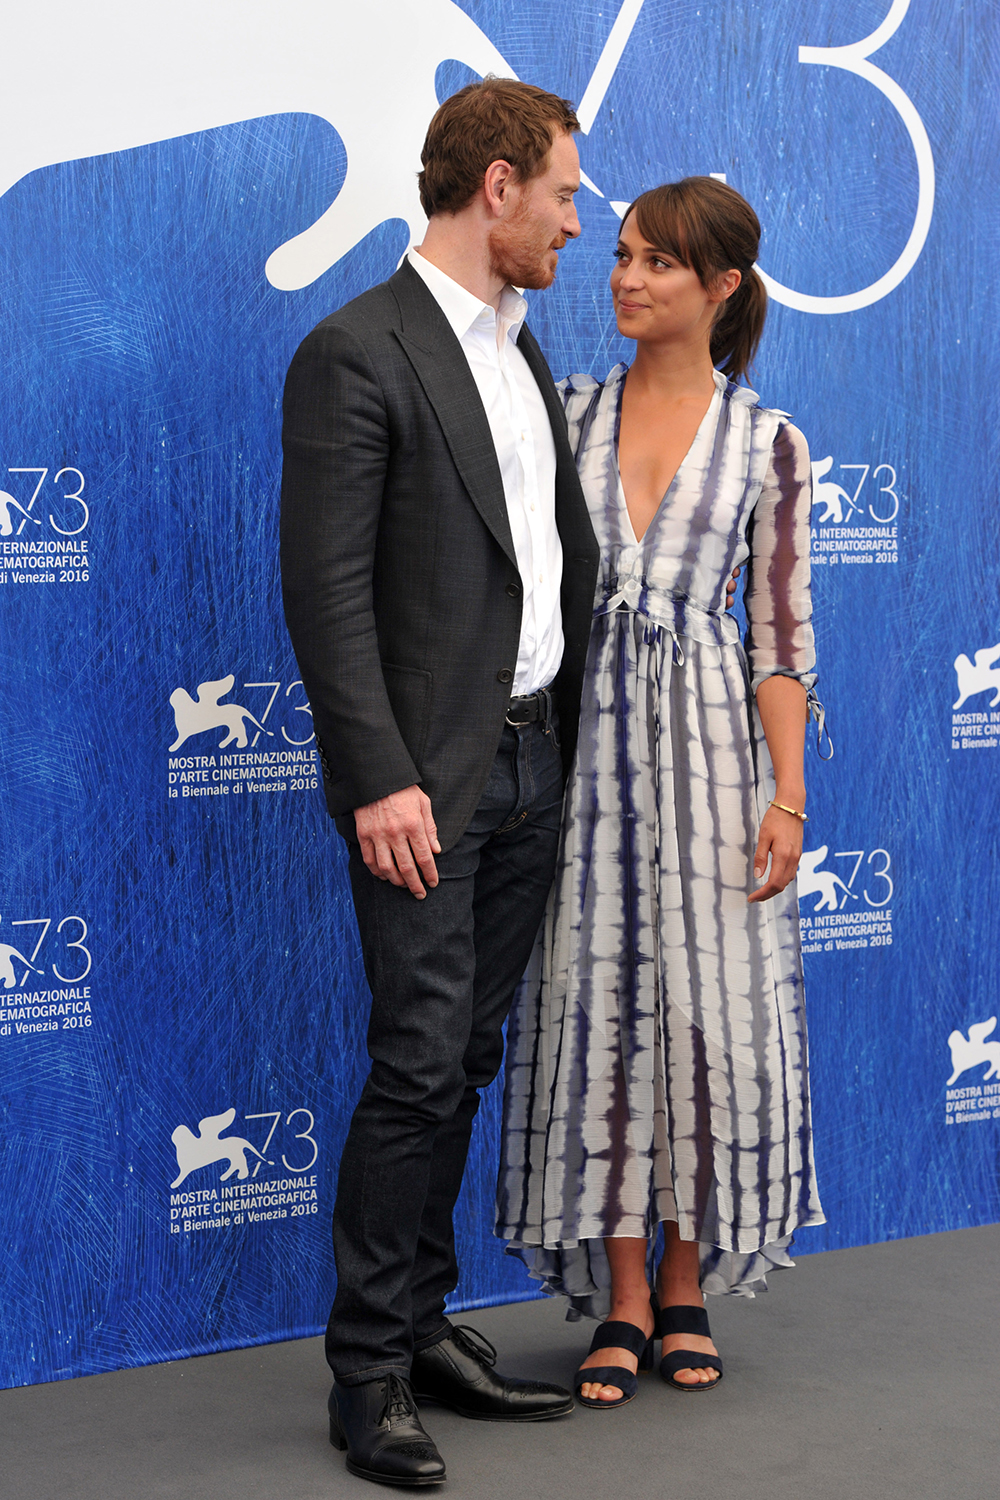 Michael Fassbender and Alicia Vikander at a photocall for The Light Between Oceans.